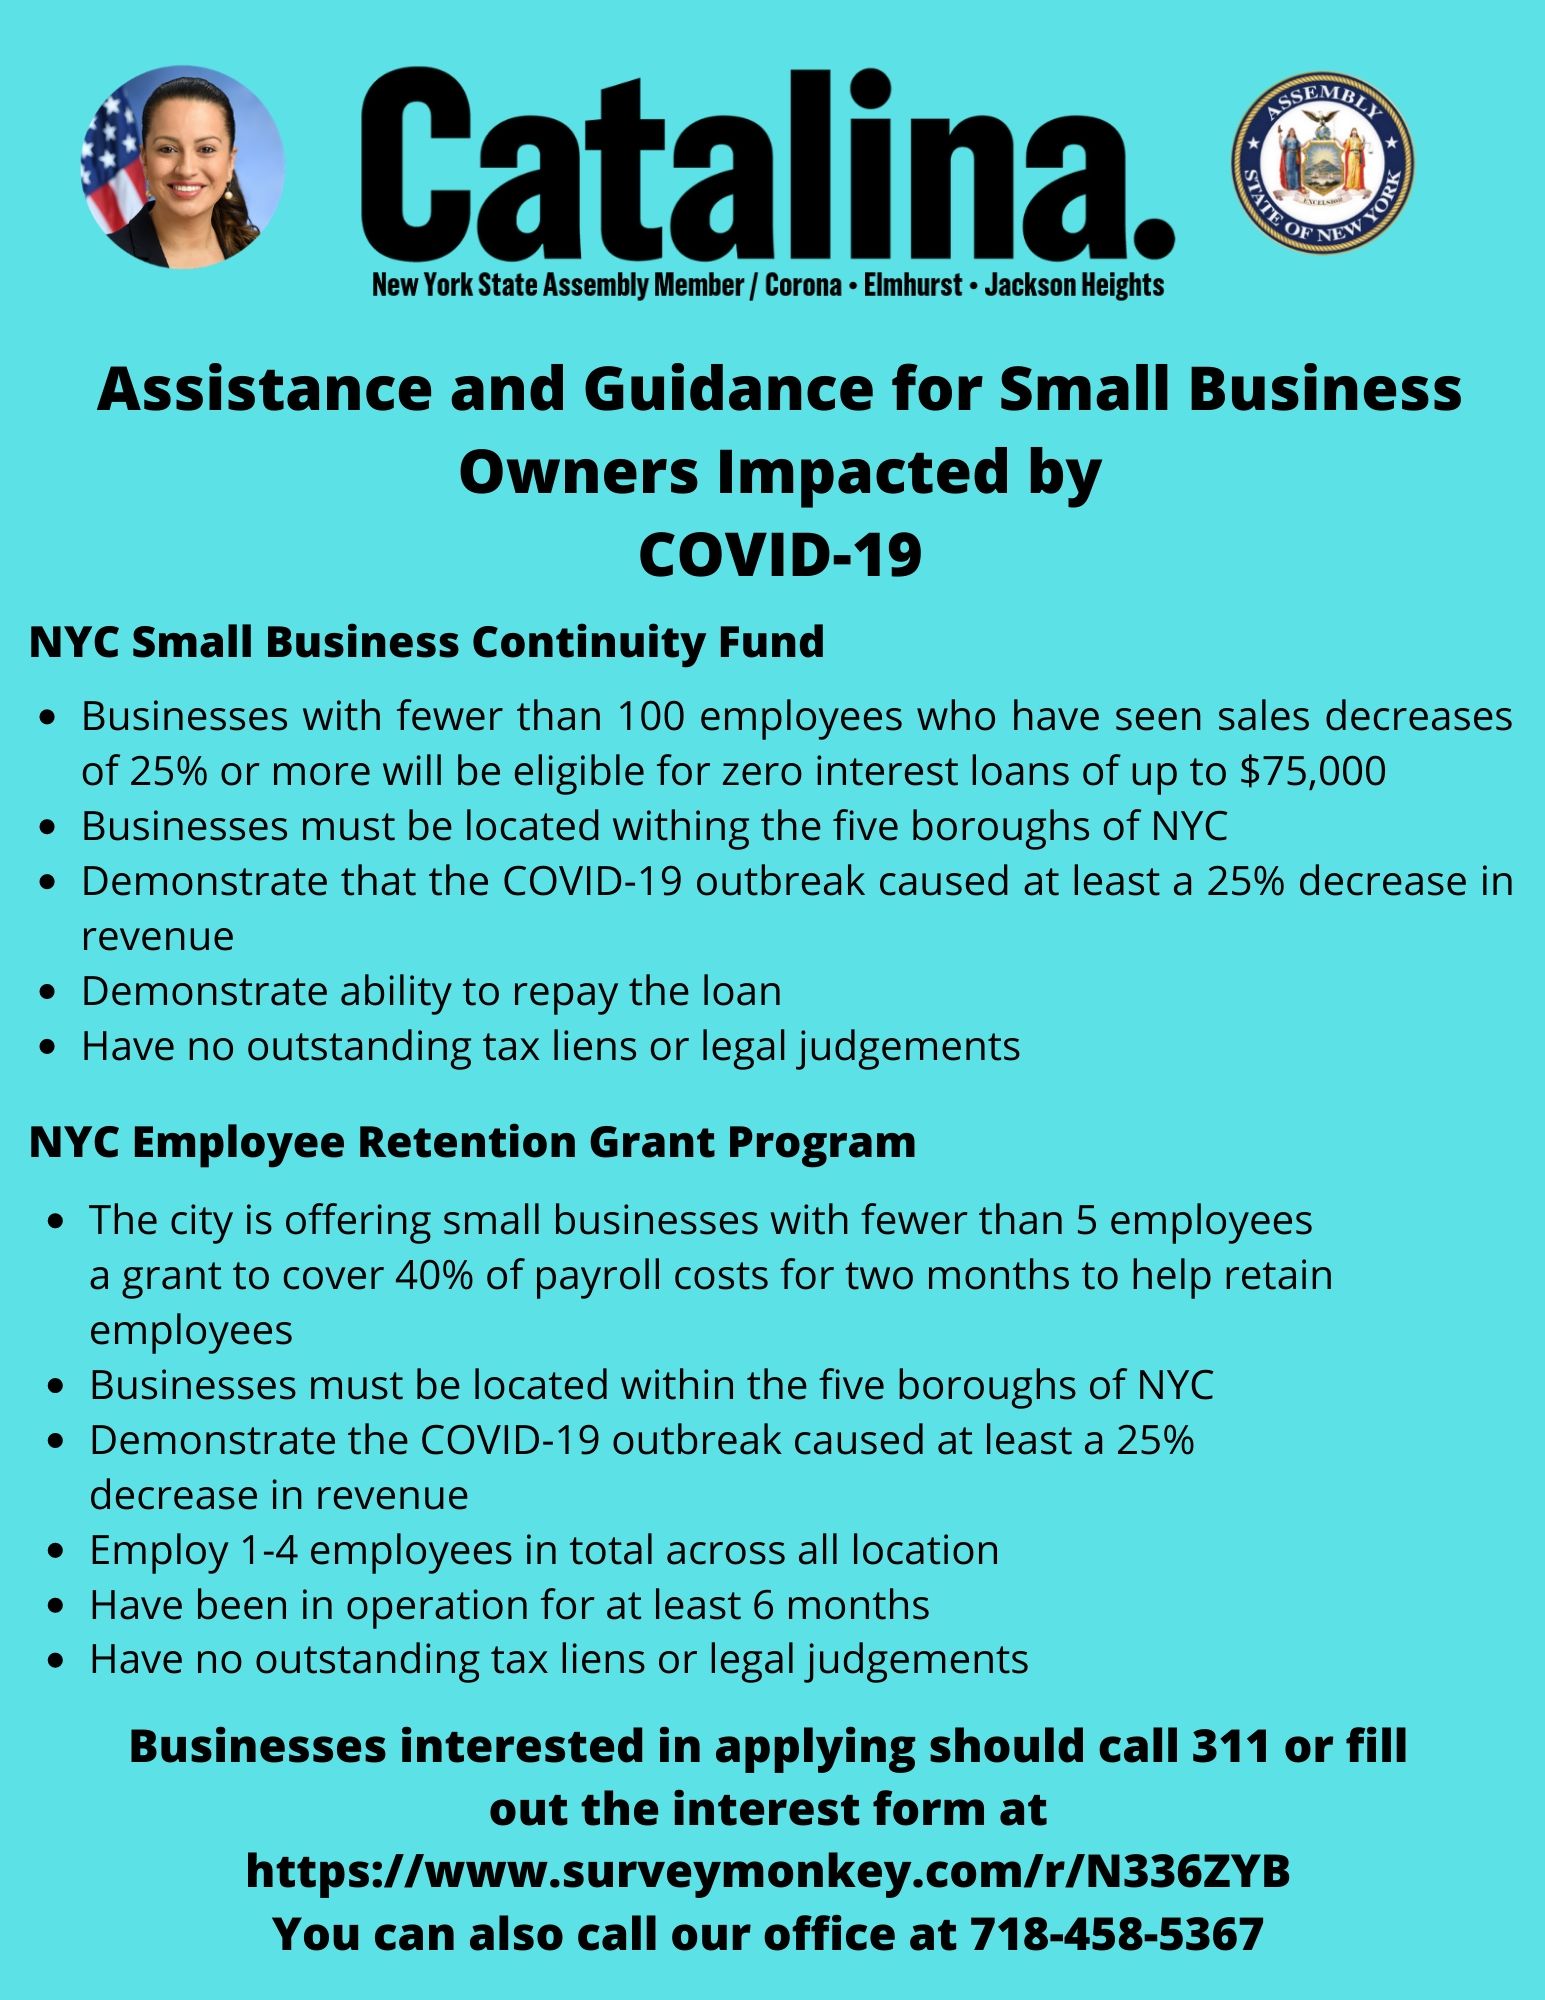 Assistance and Guidance for Small Business Owners Impacted by COVID-19